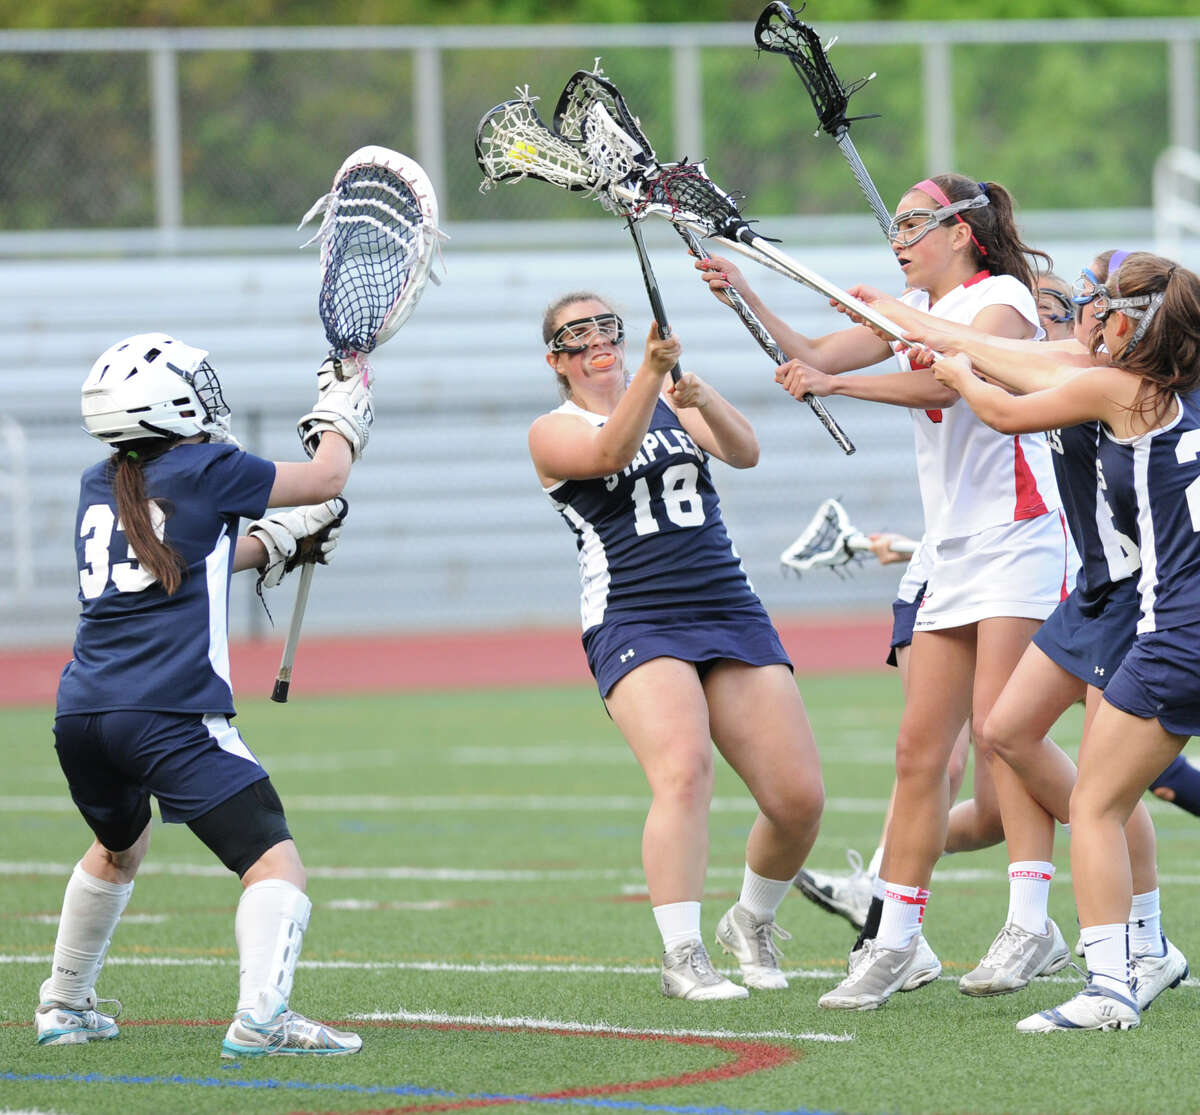 At right, Emma Christie of Greenwich shoots and scores past Staples goalie Emma Boland during the girls high school lacrosse match between Greenwich High School and Staples High School at Greenwich, Thursday, May 9, 2013. At center is Deanna Schreiber (# 18) of Staples.